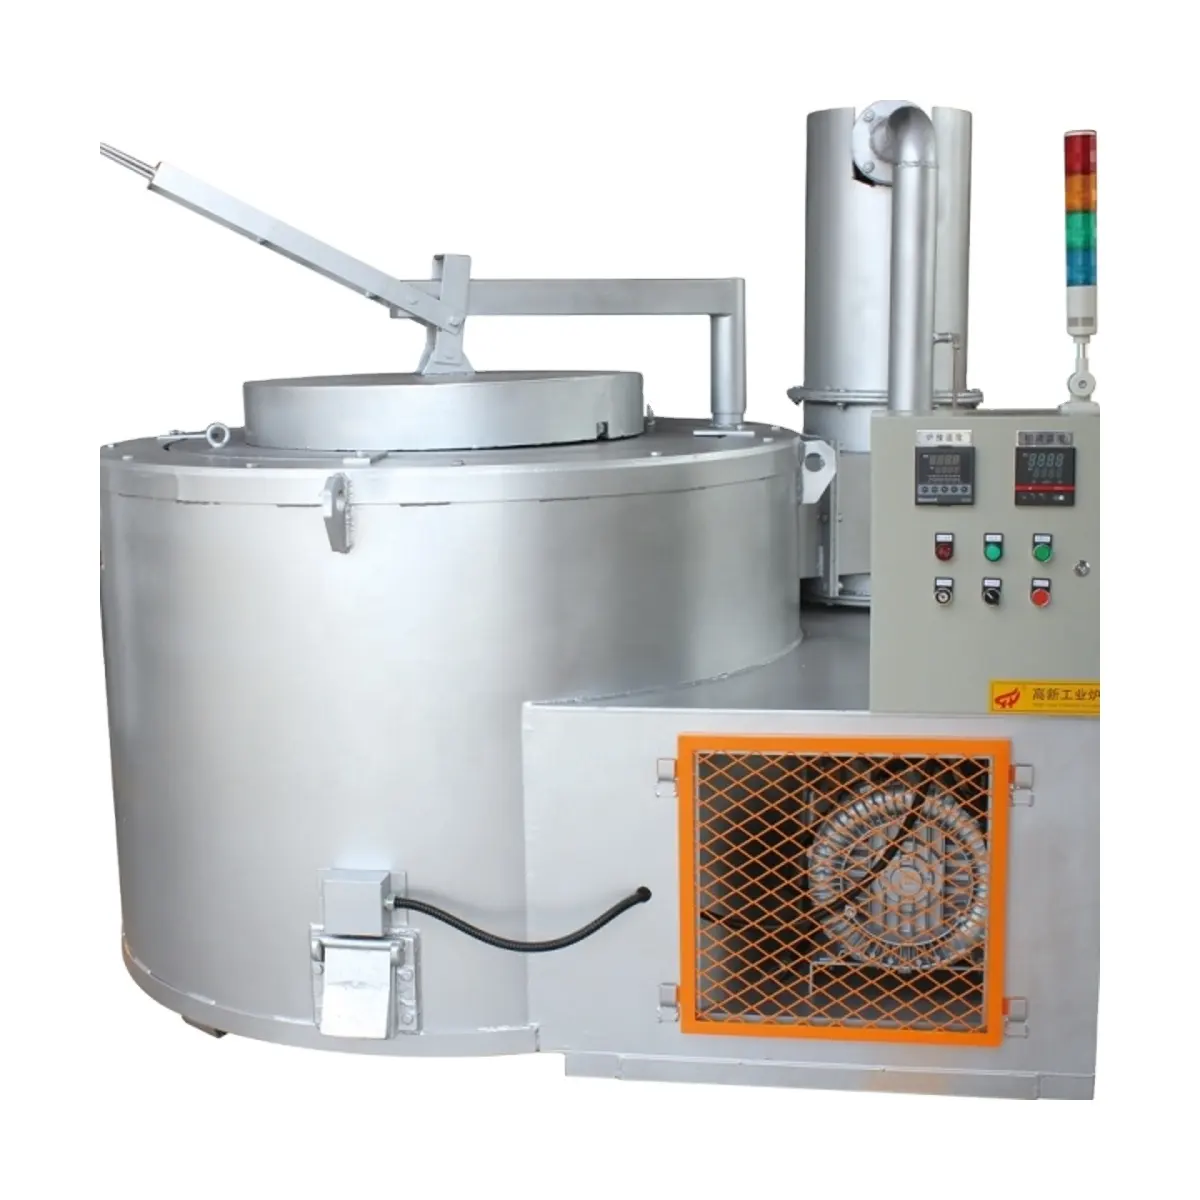 100kg Professional crucible industry melting furnace hot sell in pakistan malaysia